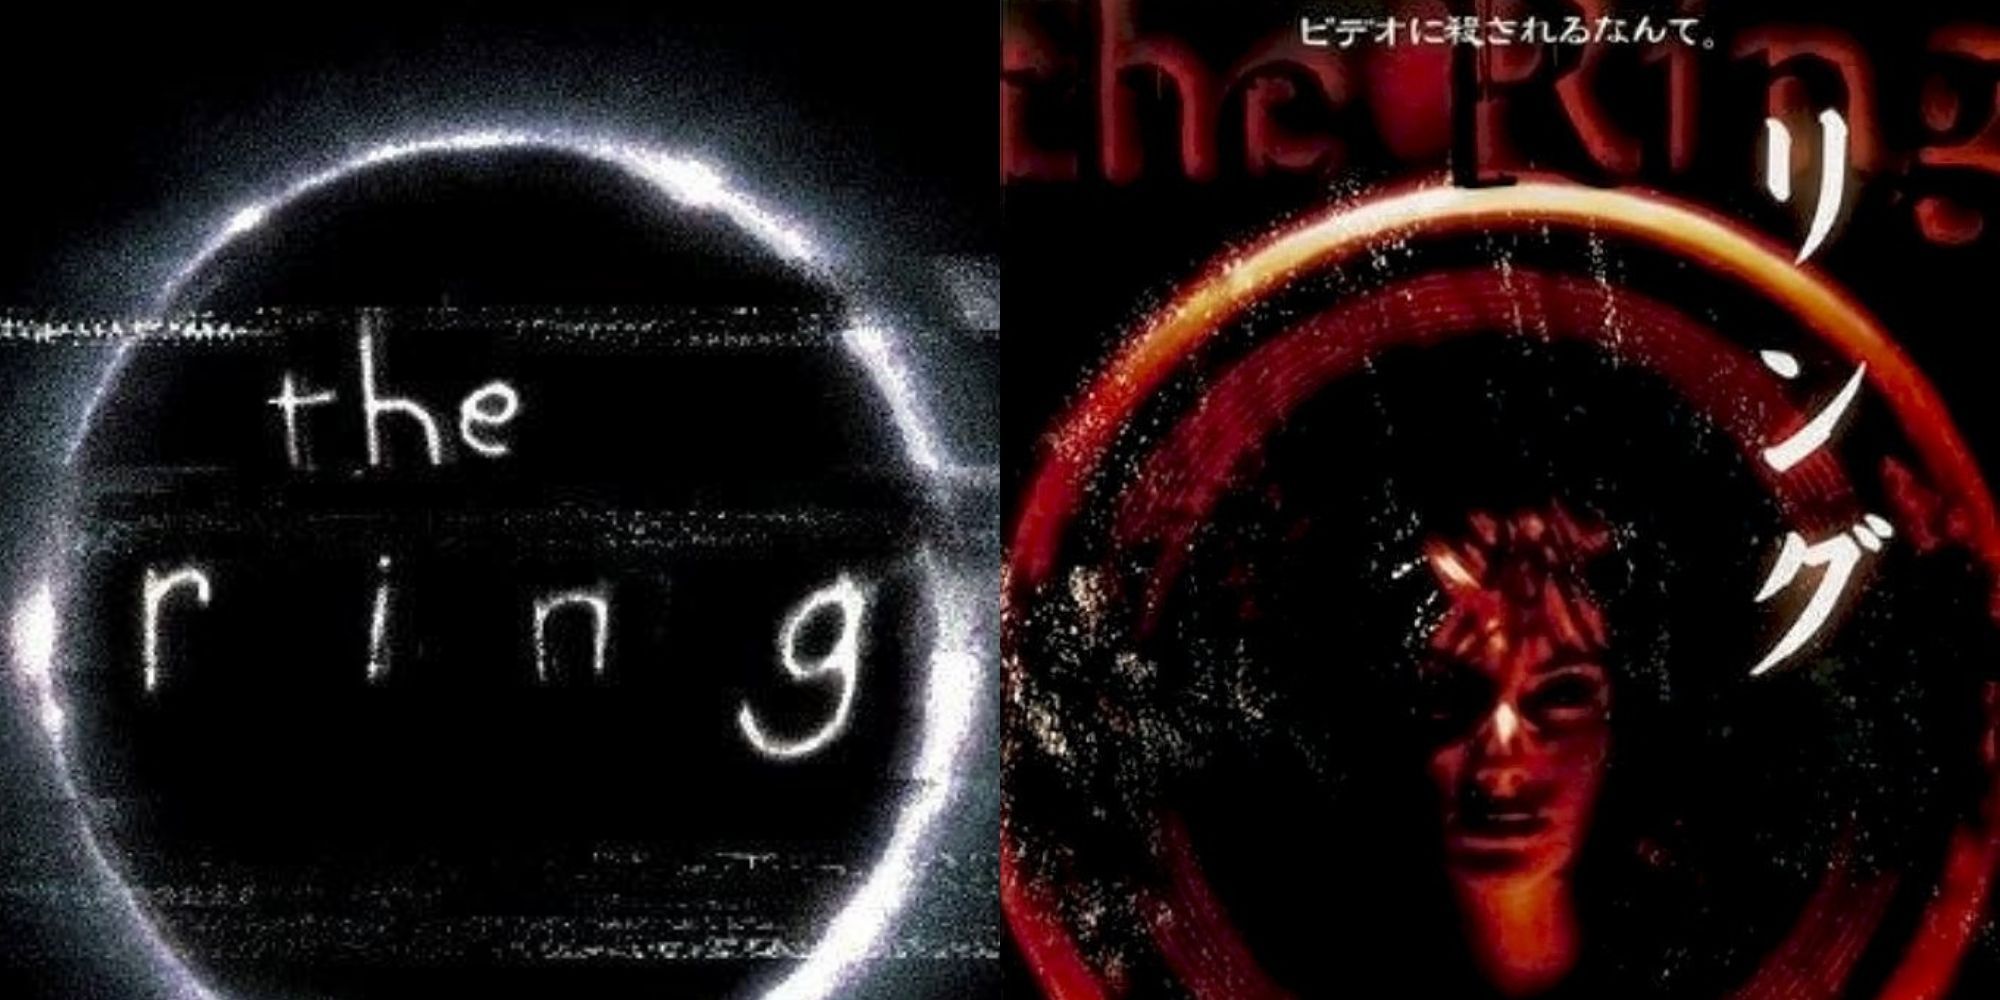 The Ring poster on the left and Ringu poster on the right